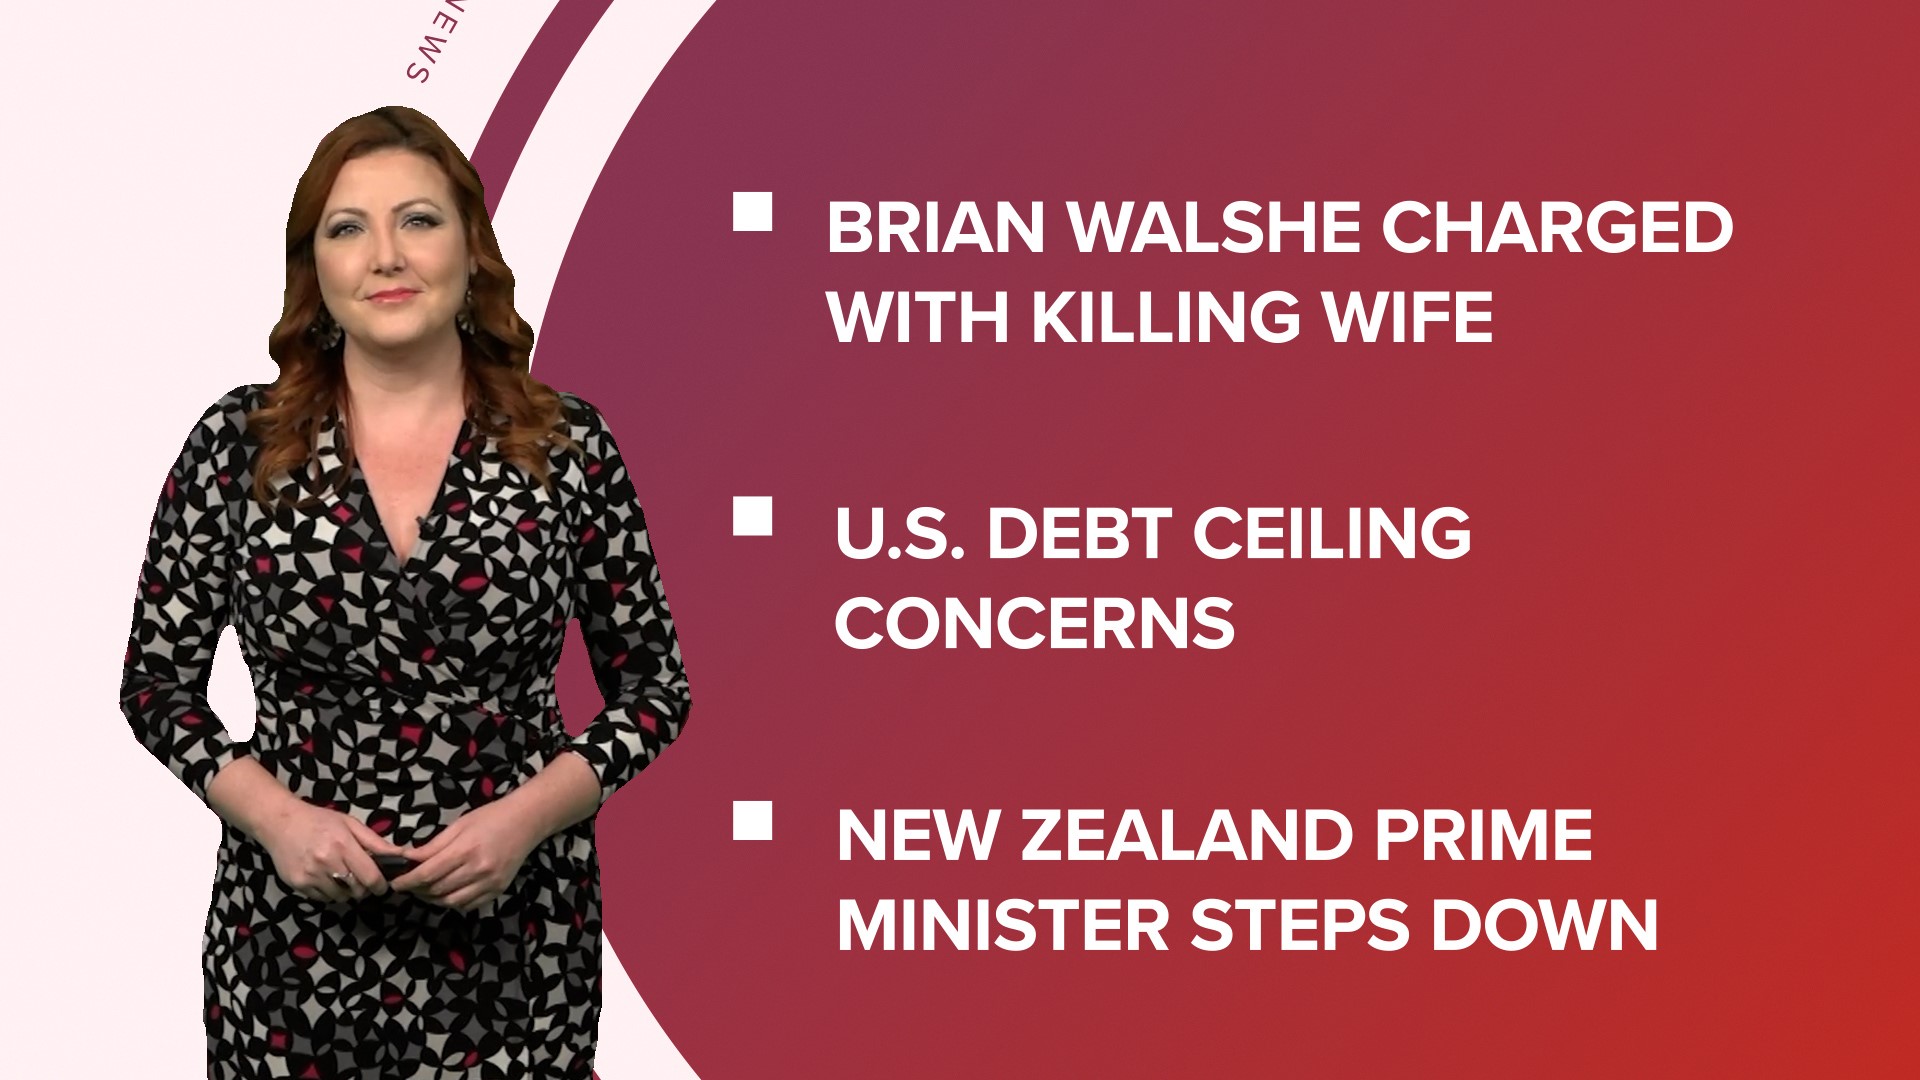 A look at what is happening in the news from Brian Walshe being charged with his wife's murder to US debt ceiling concerns and Dolly Parton's 77th birthday.